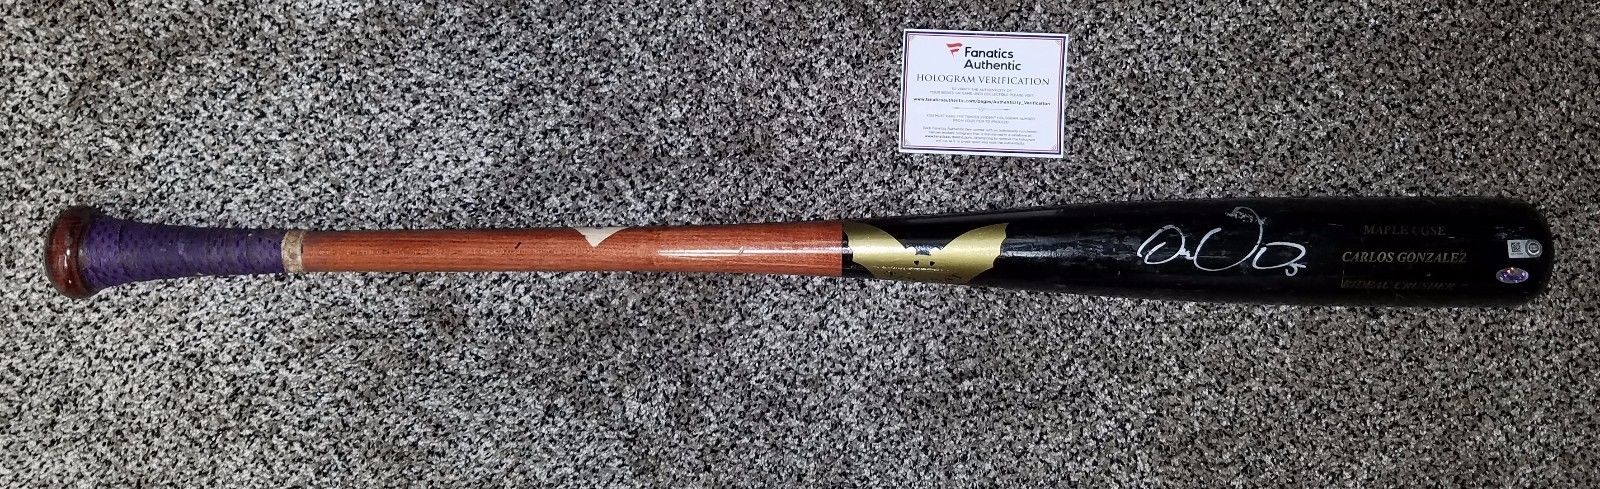 Carlos Gonzalez 2014 Autographed Game Used BAT MLB Authenticated Rockies rare